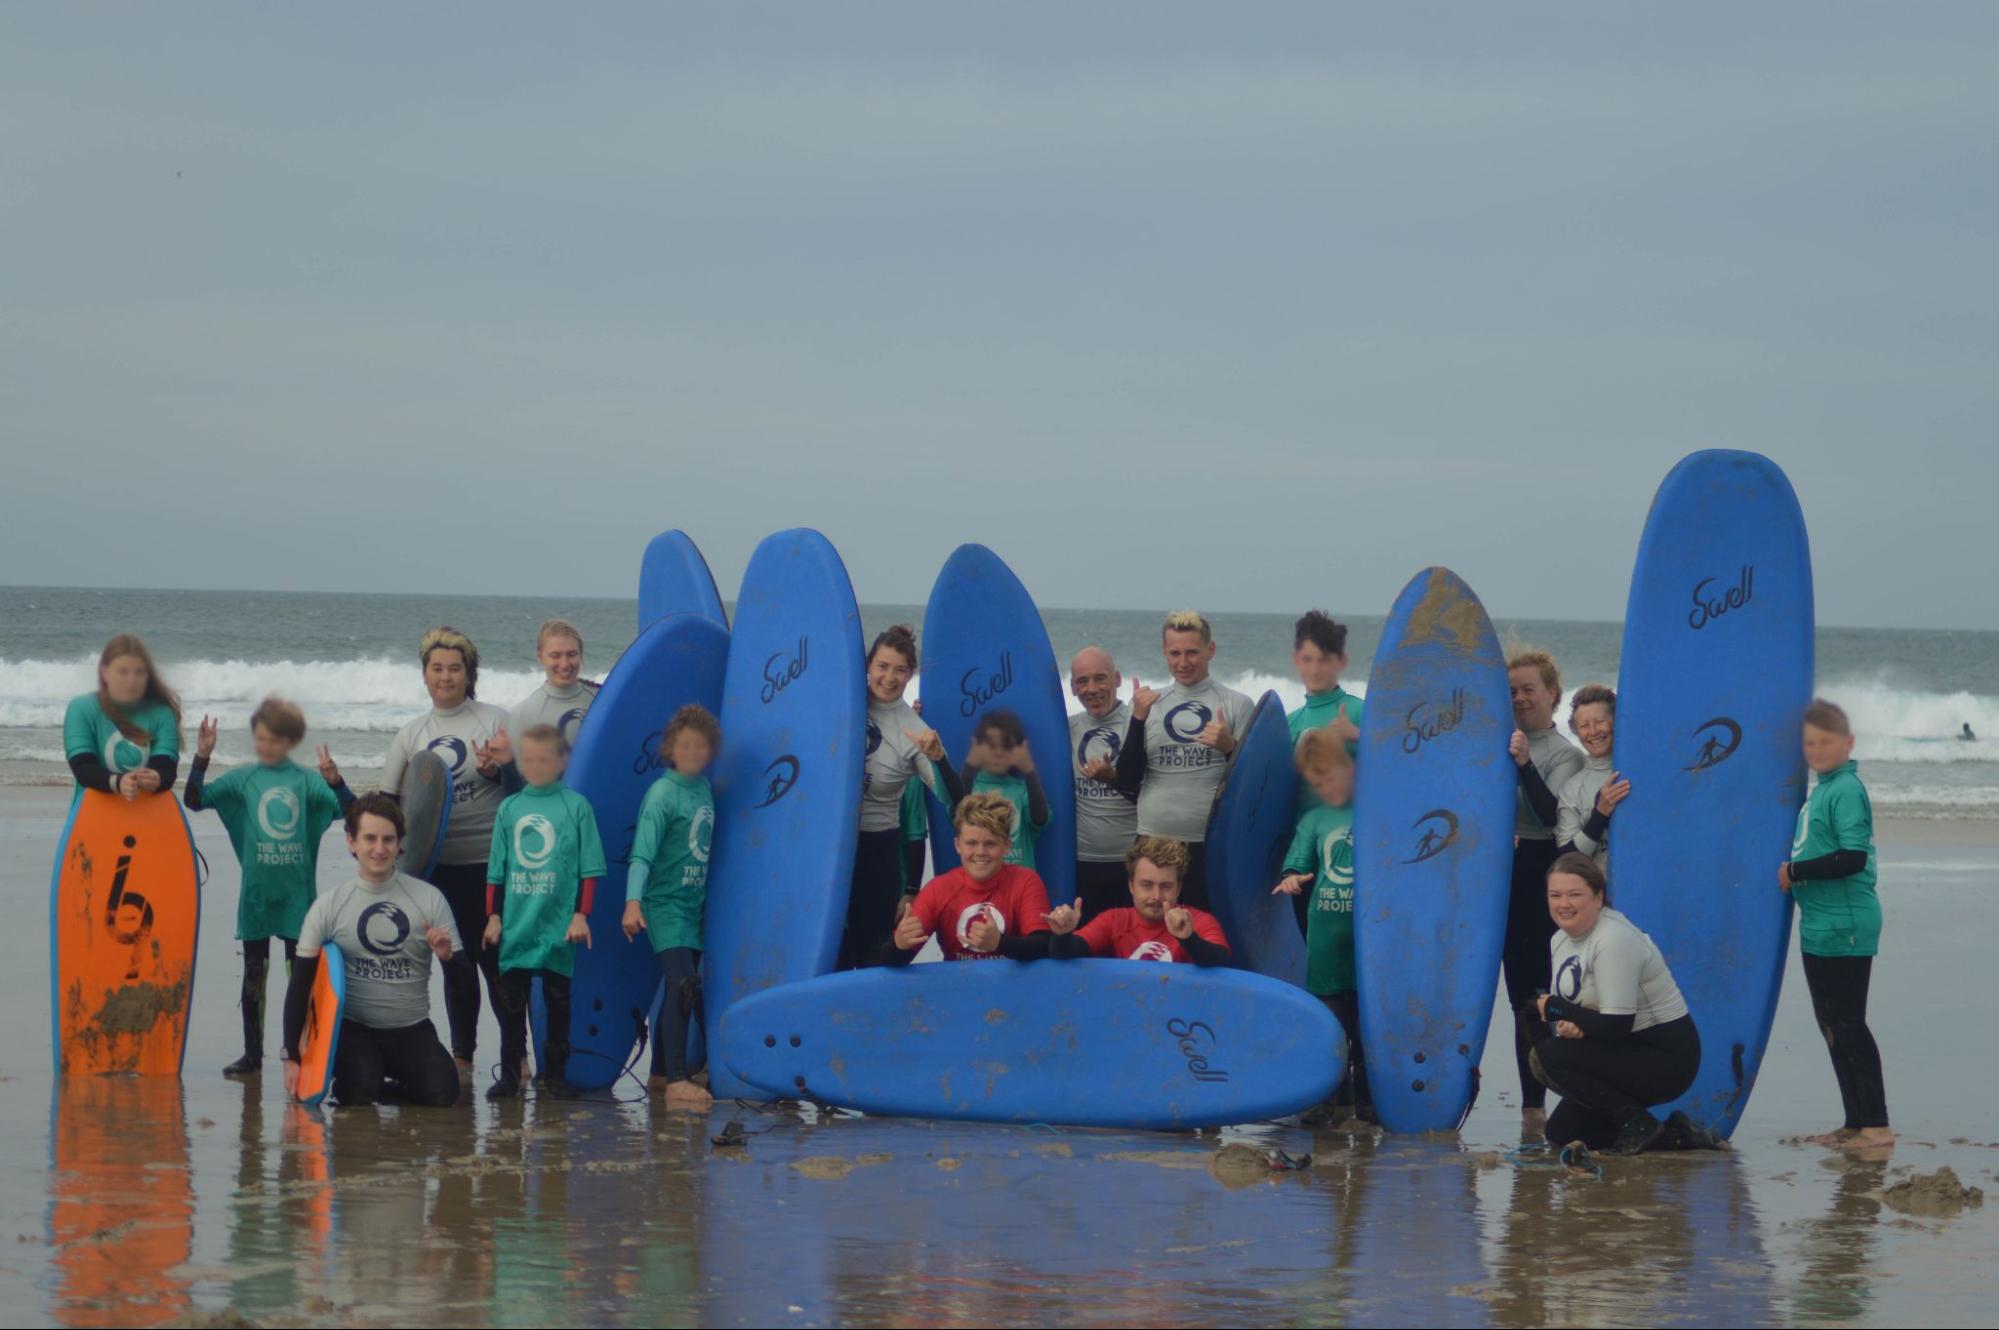 The Wave Project – Providing mental health support through the joys of surfing